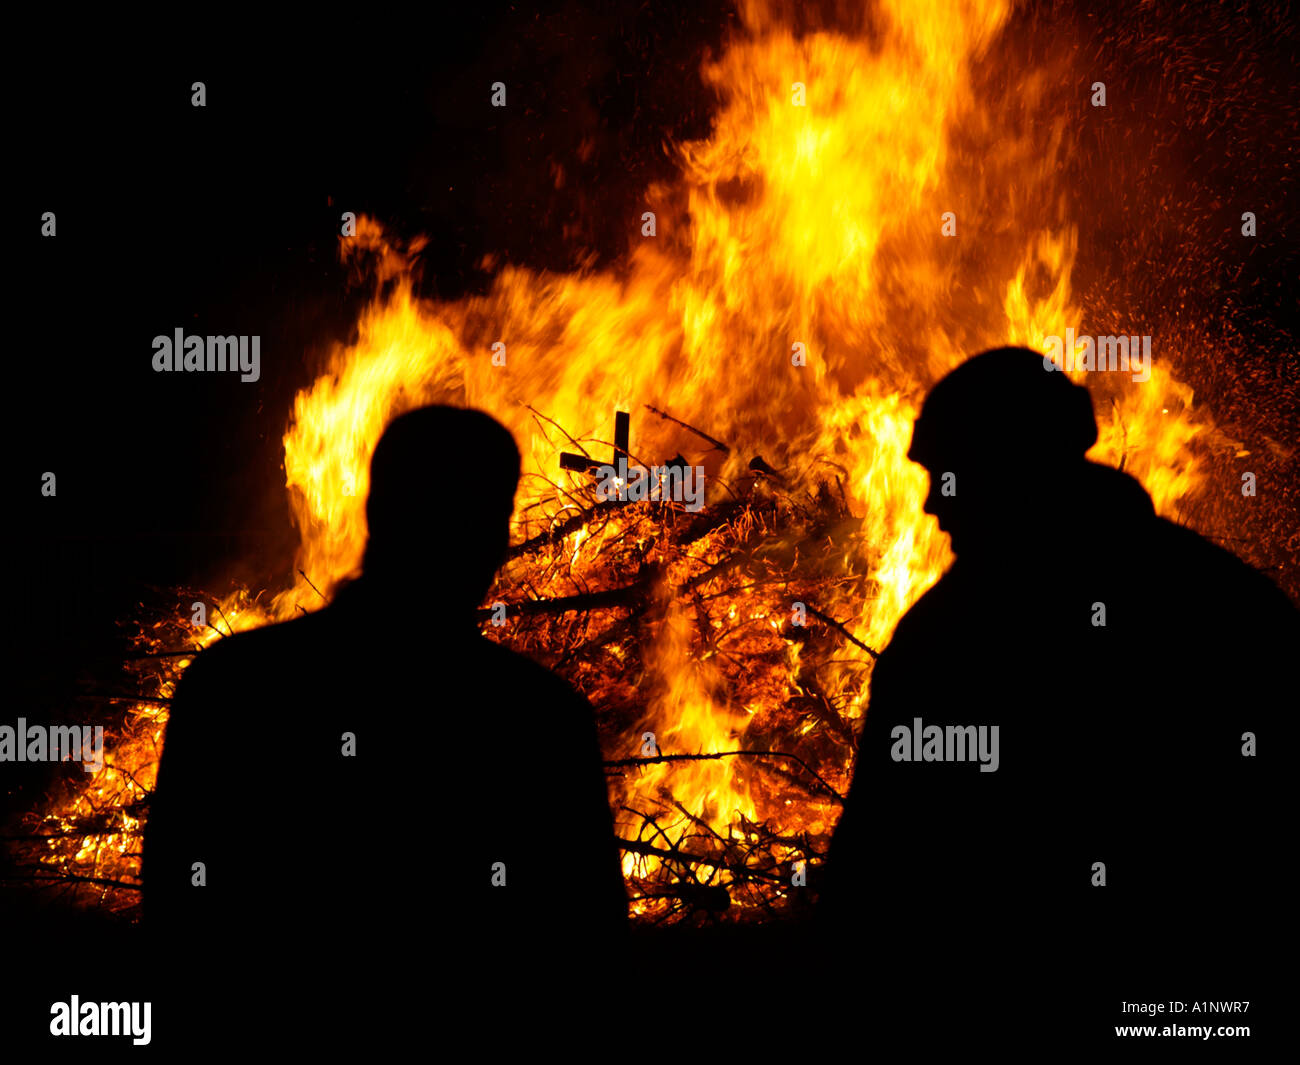 two men silhouetted in front of a huge fire bonfire from burning old christmas trees a custom in the Netherlands early january Stock Photo